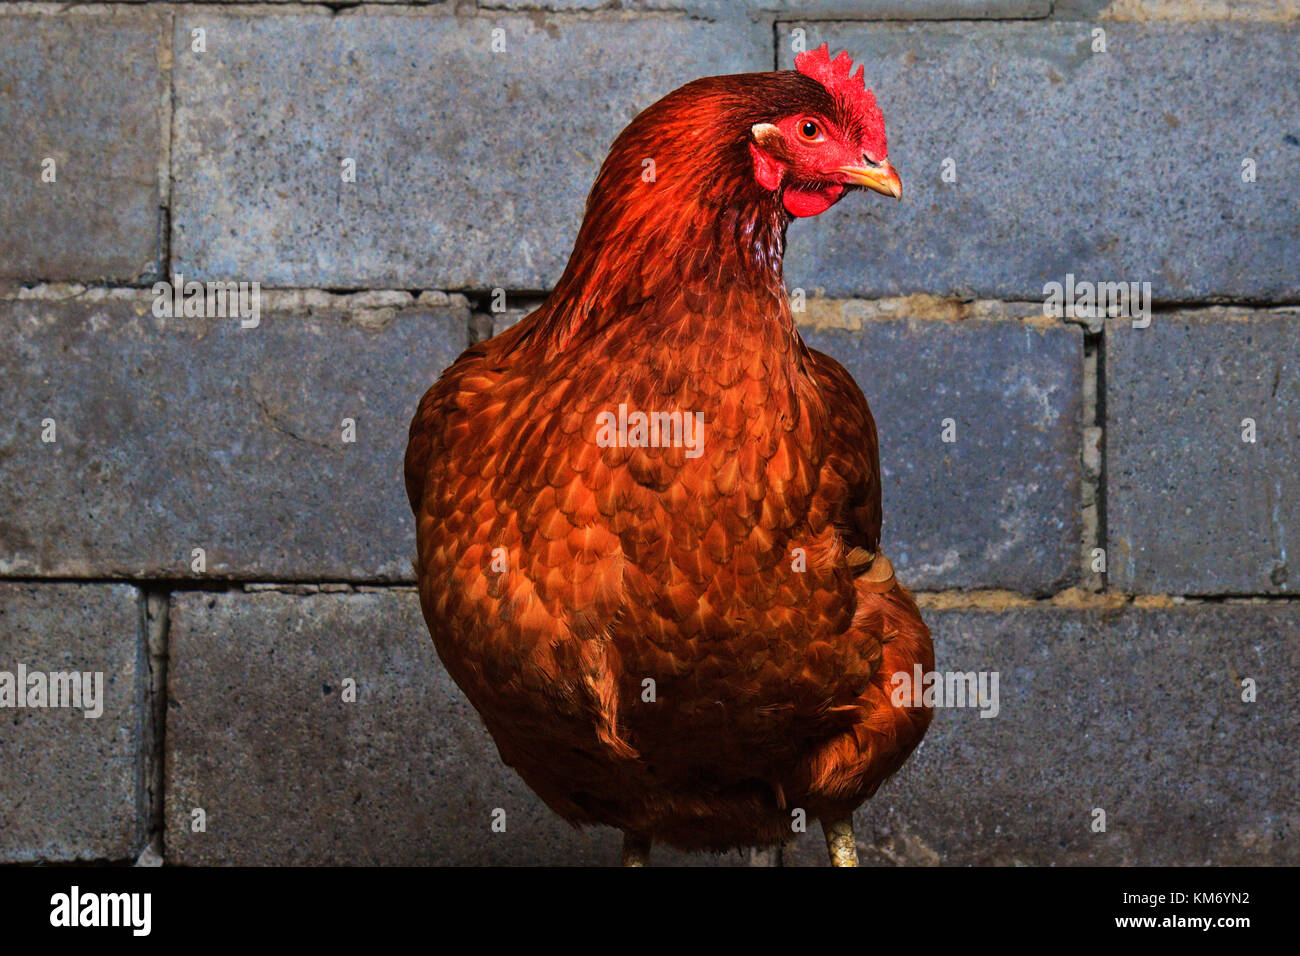 Chicken breed red Stock Photo